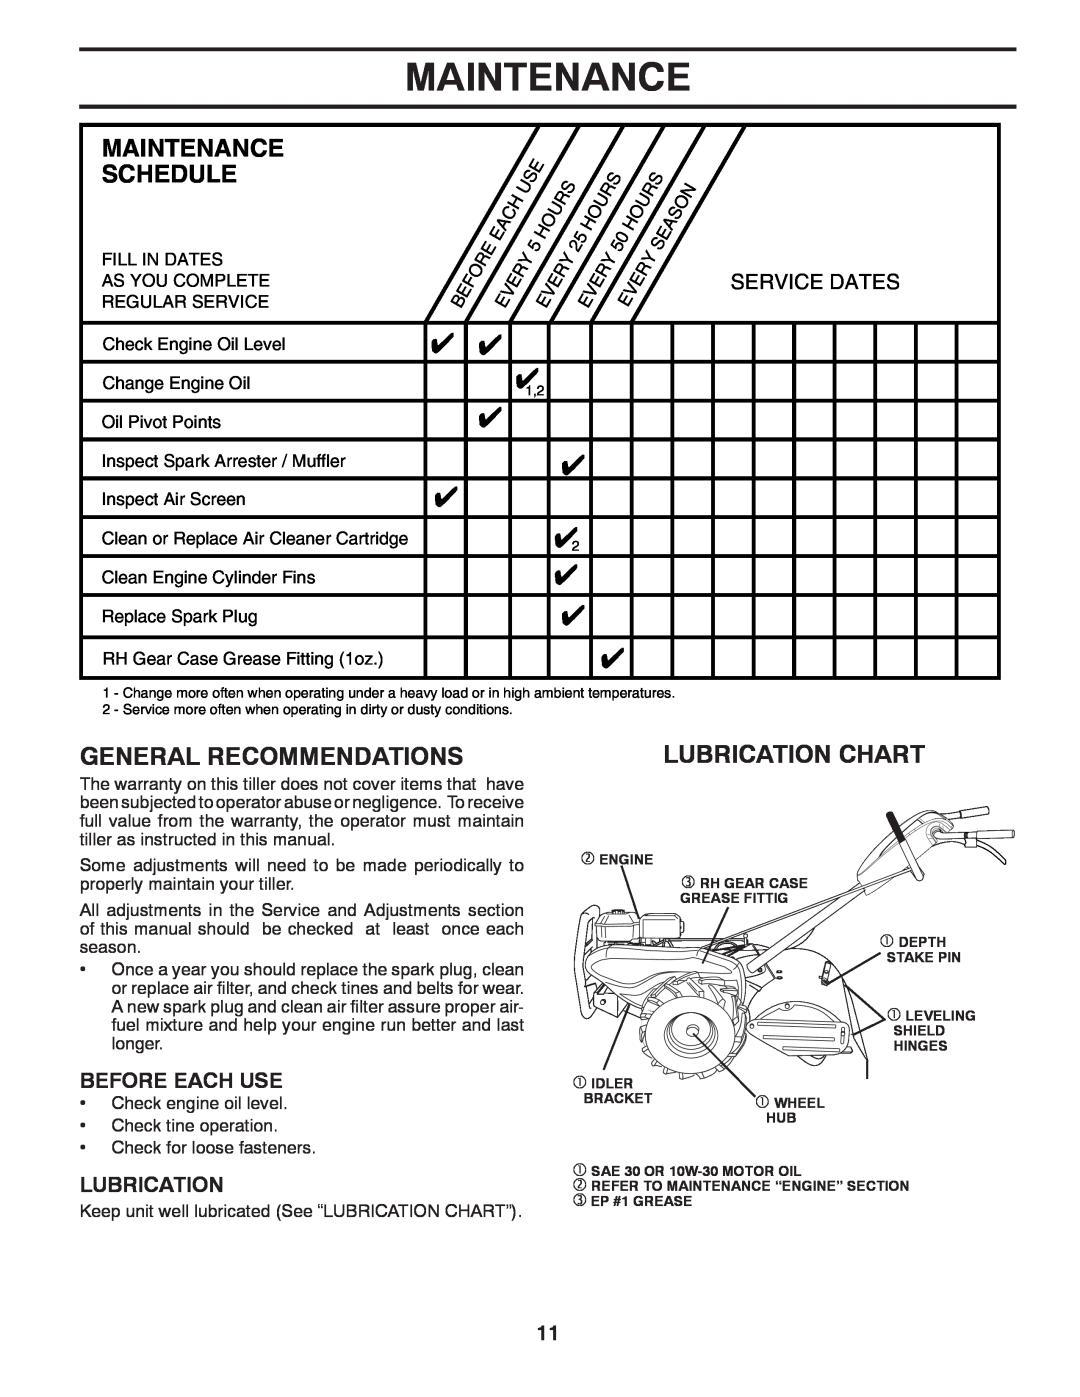 Poulan PRRT9000 Maintenance Schedule, General Recommendations, Lubrication Chart, Before Each Use, Service Dates 